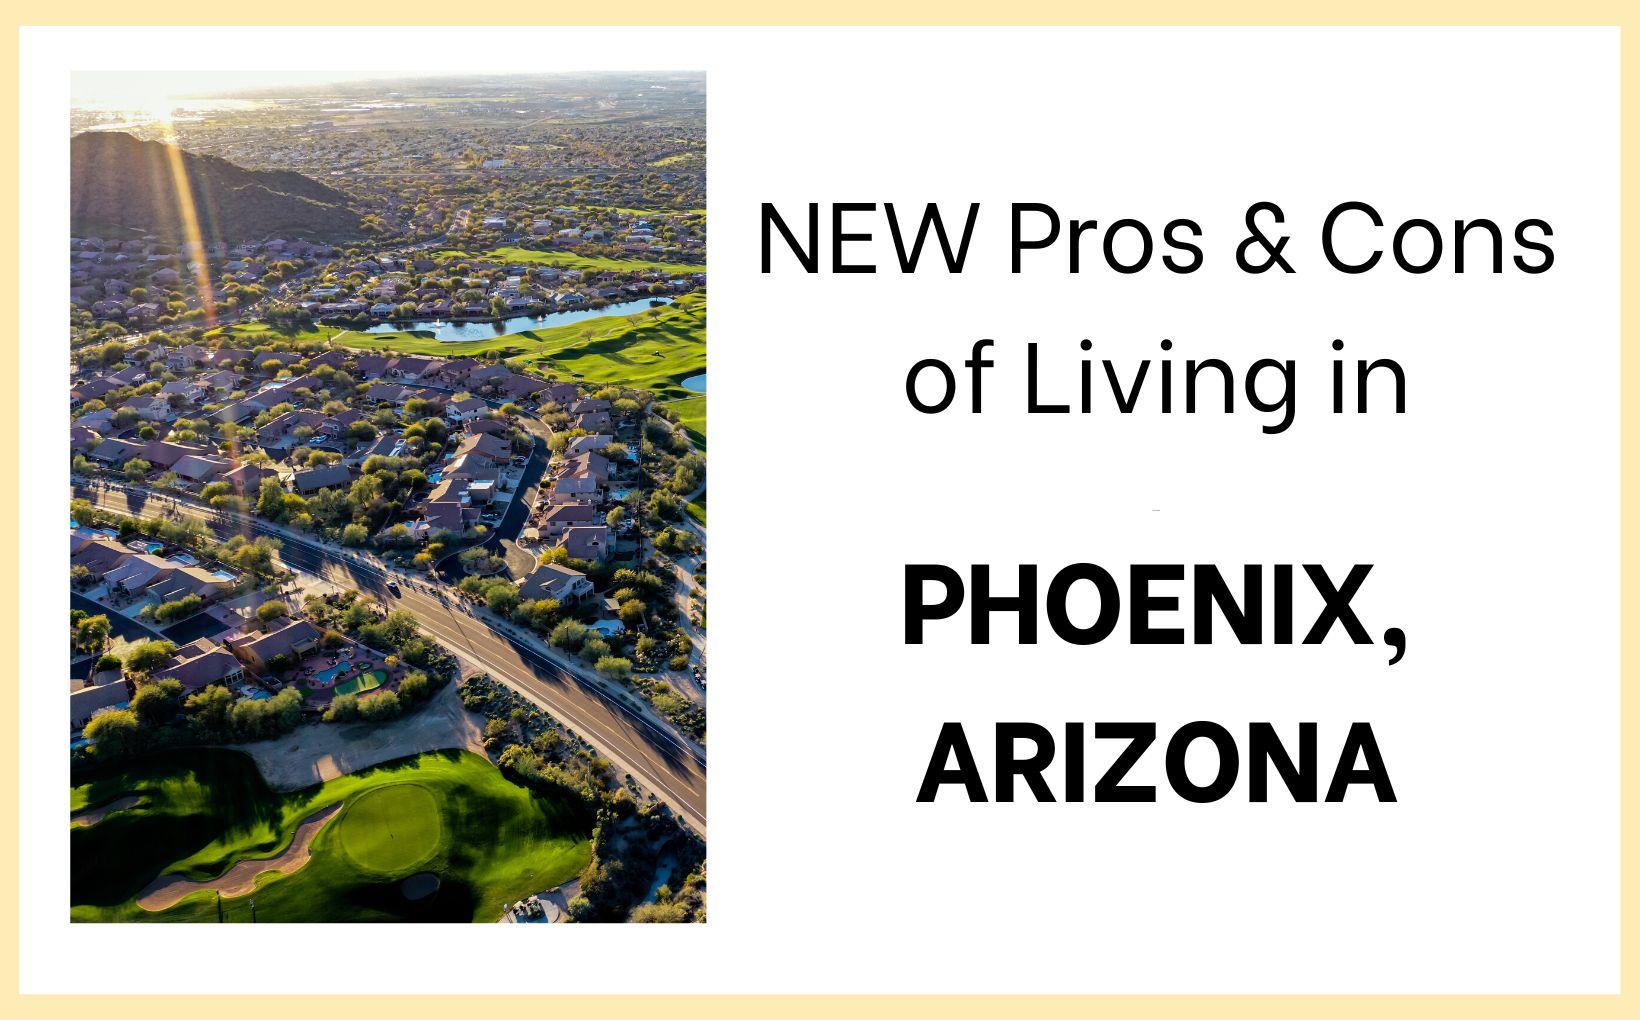 New pros and cons of living in Phoenix Arizona feature image